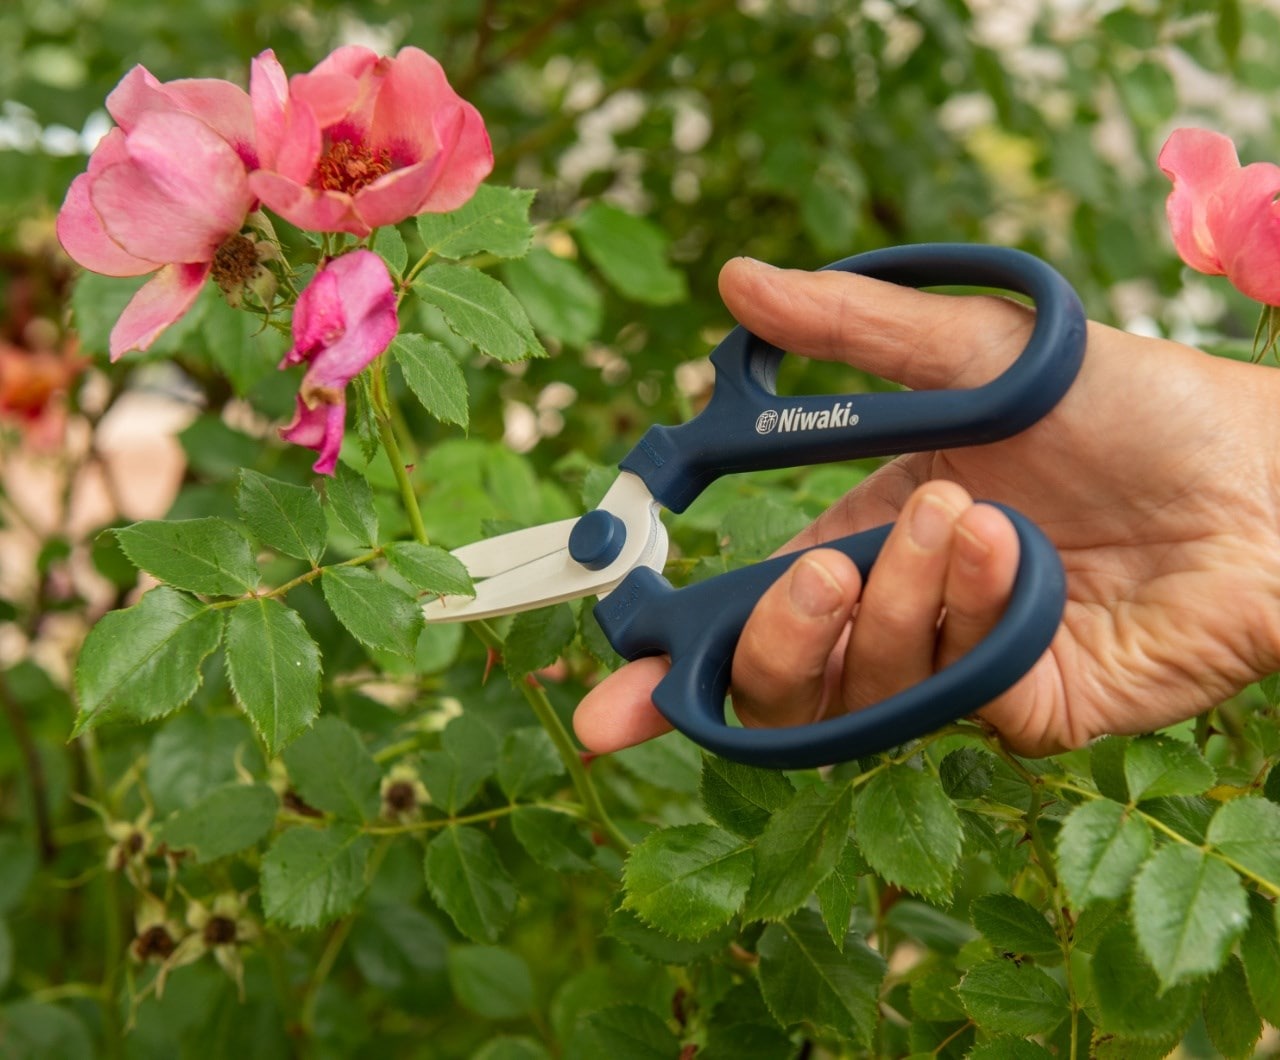 When to prune roses